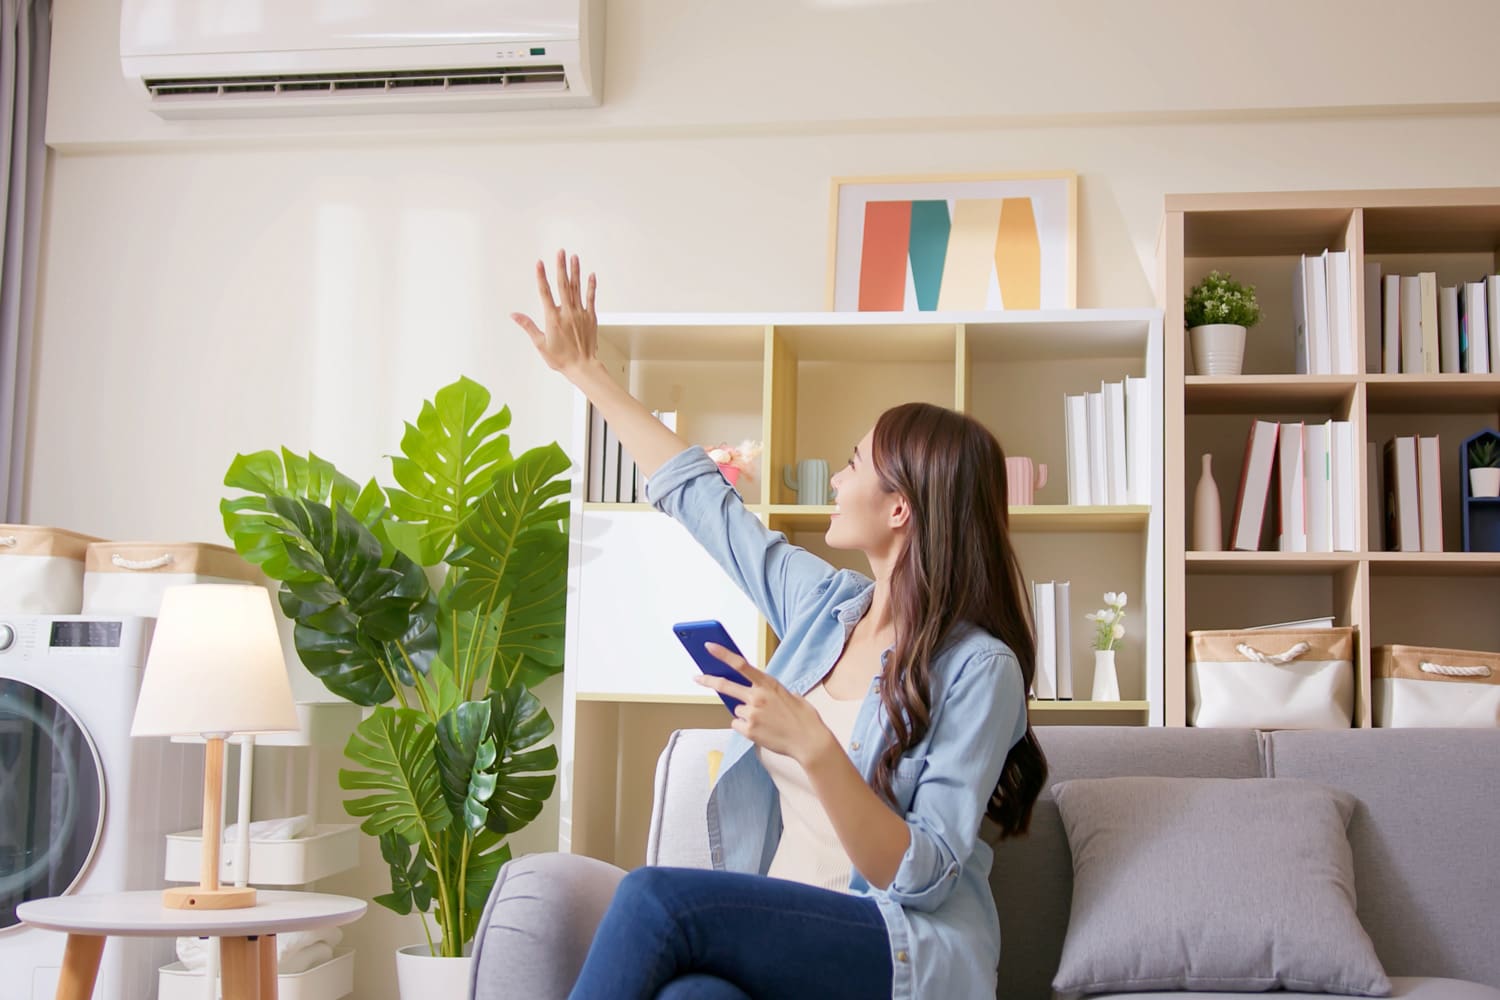 IOT smart home system concept - young woman using app on mobile phone to turn on air conditioner in living room